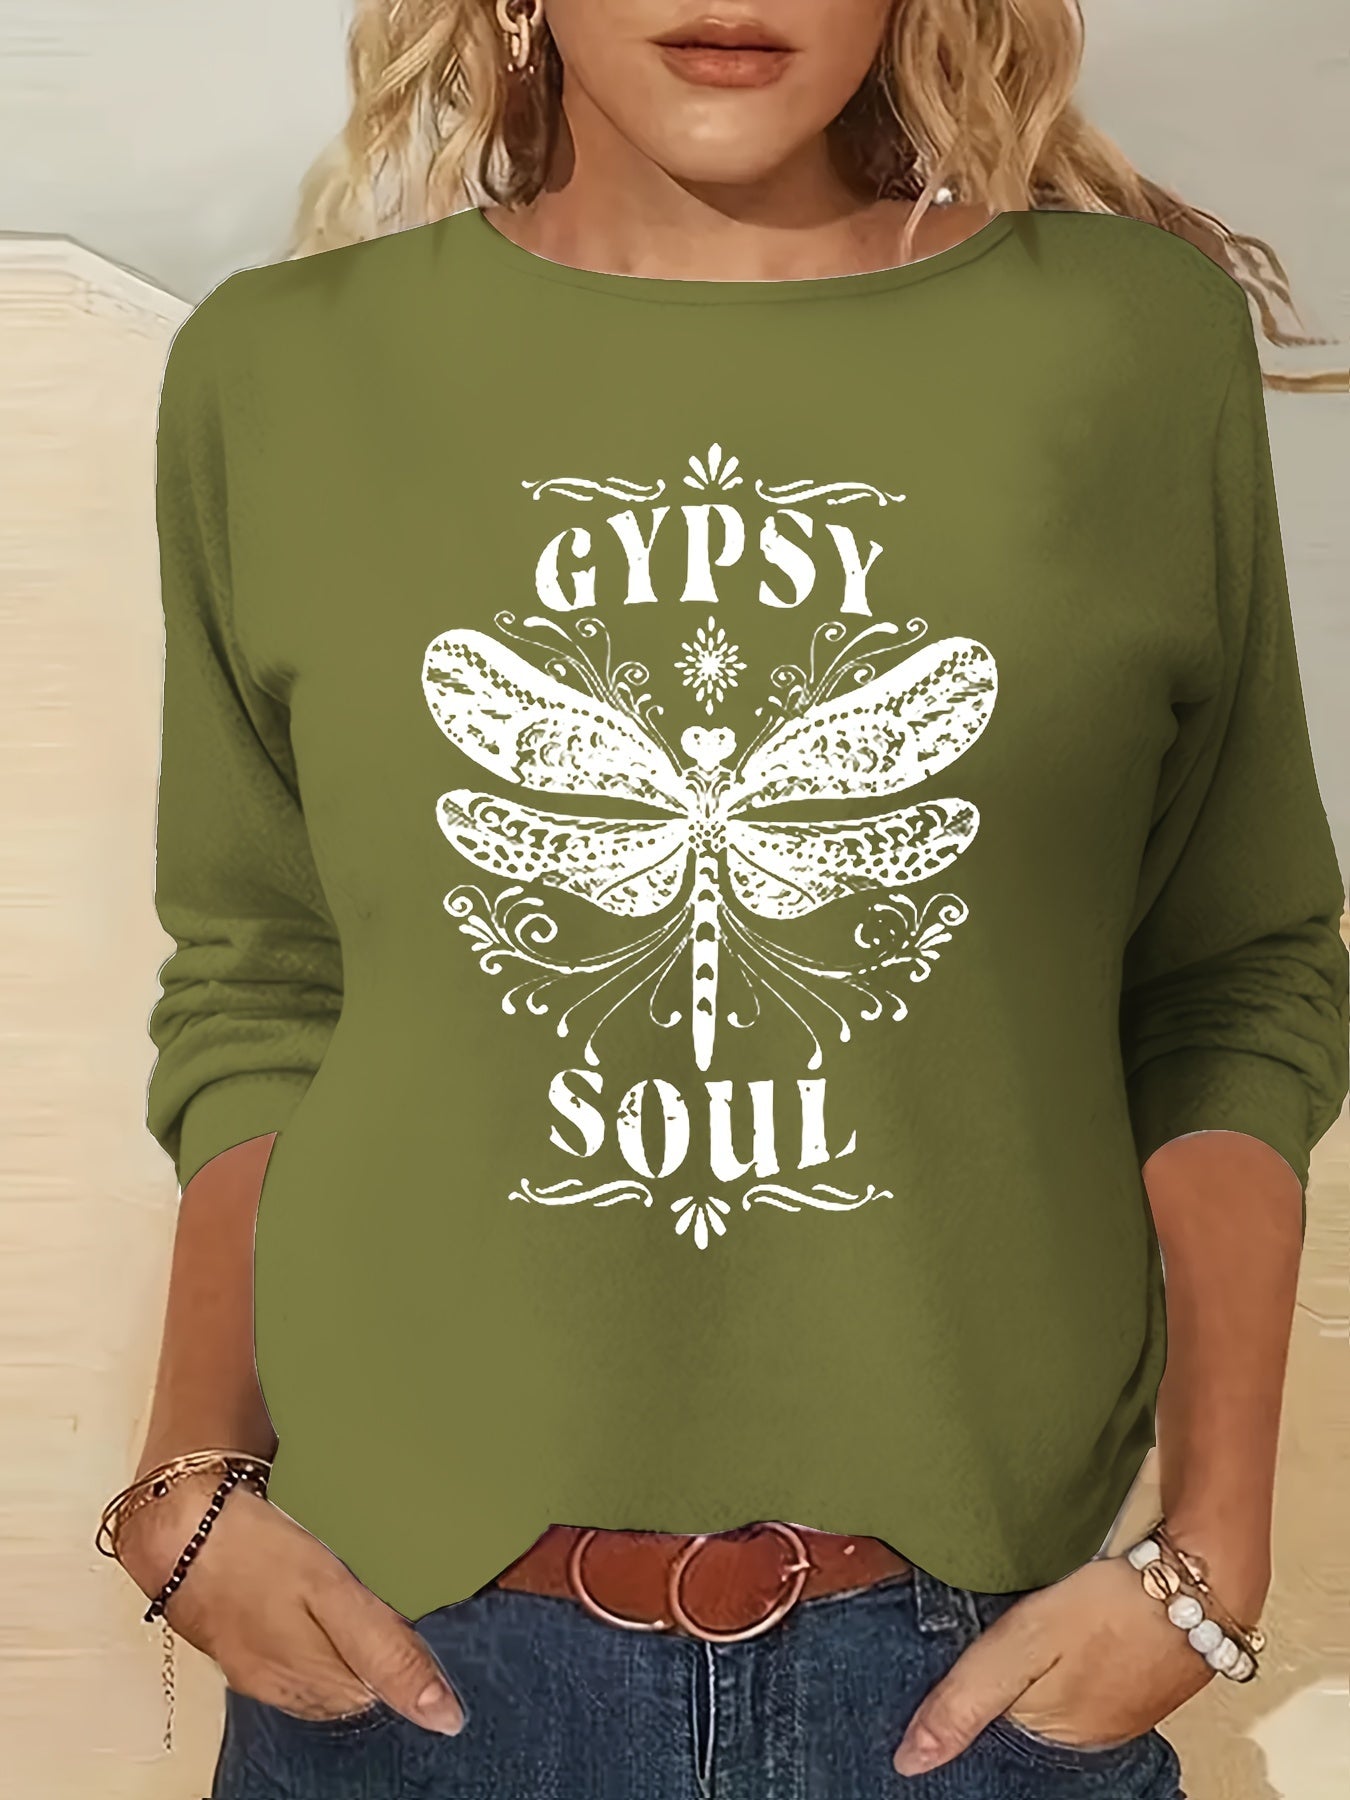 Gypsy Soul Print Long Sleeve T-Shirt, Crew Neck Casual Top For Fall & Spring, Women's Clothing